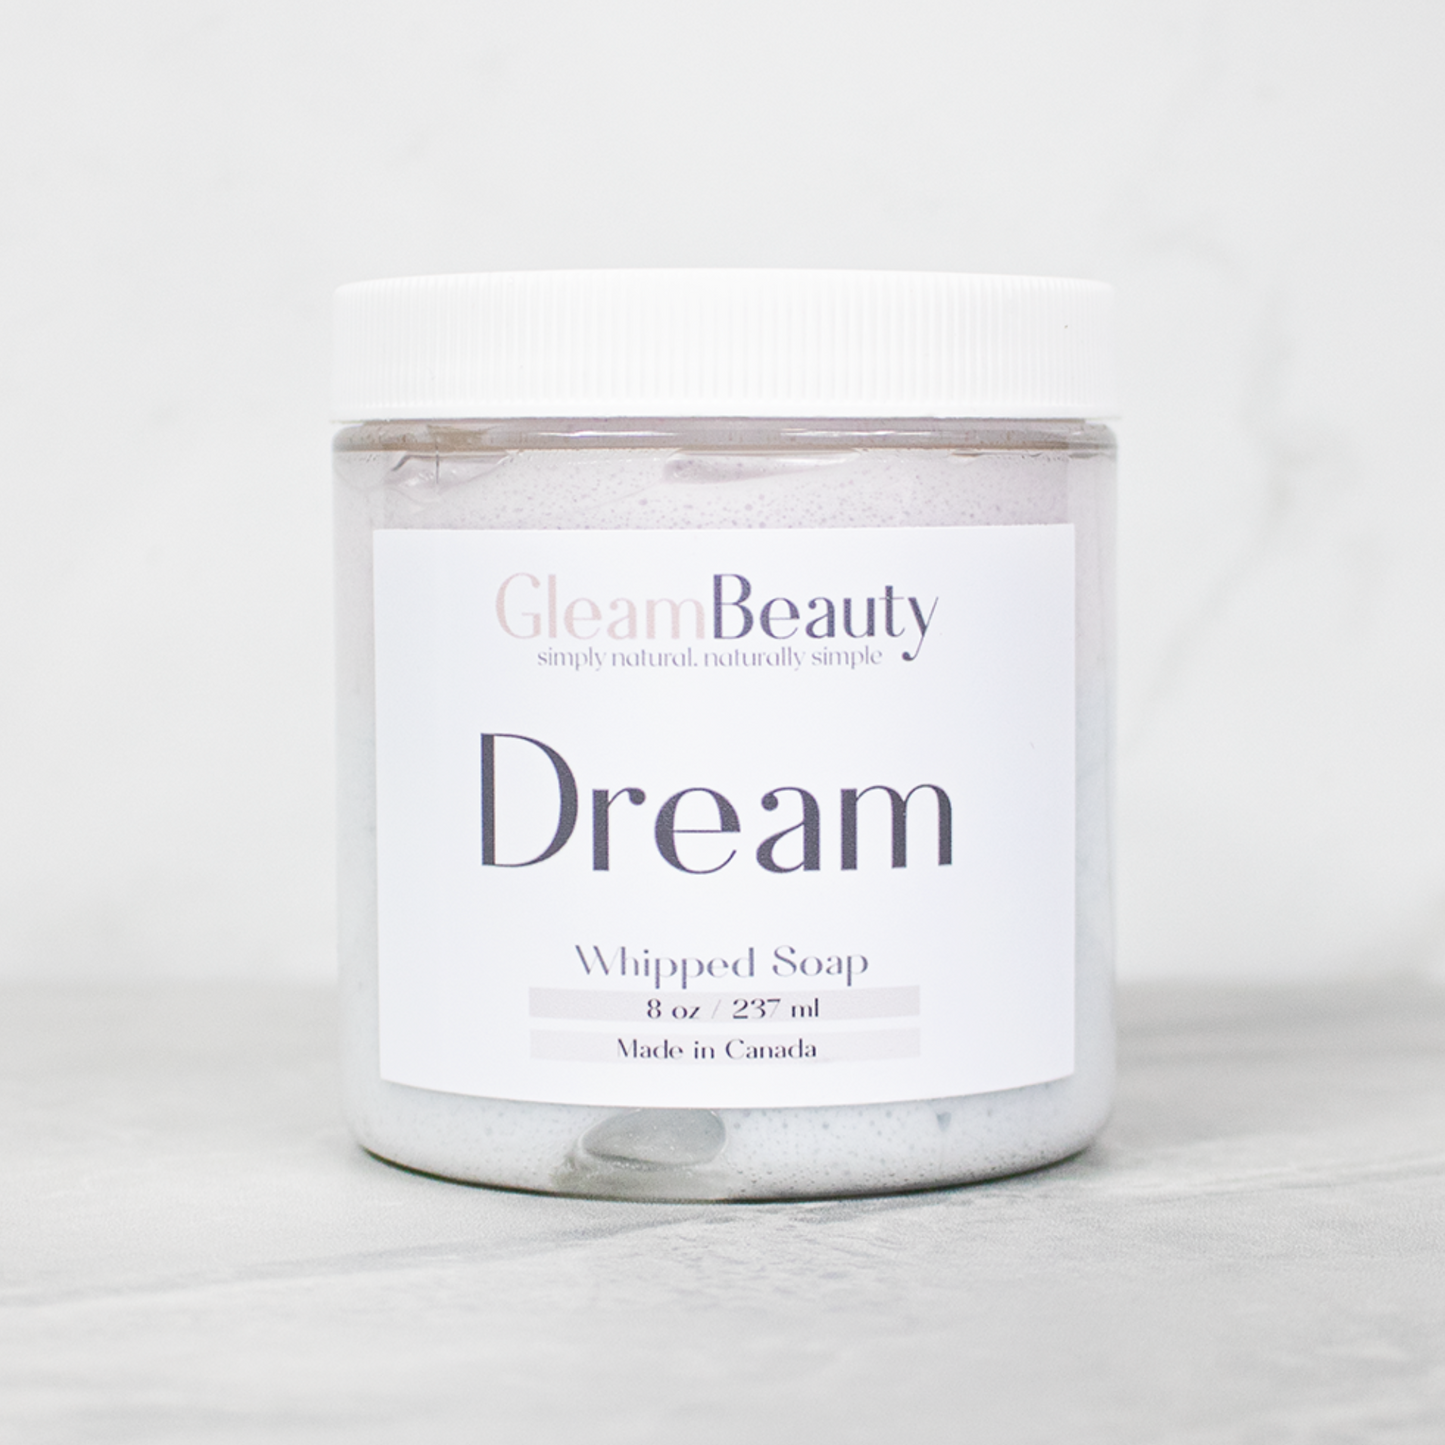 Dream Whipped Soap